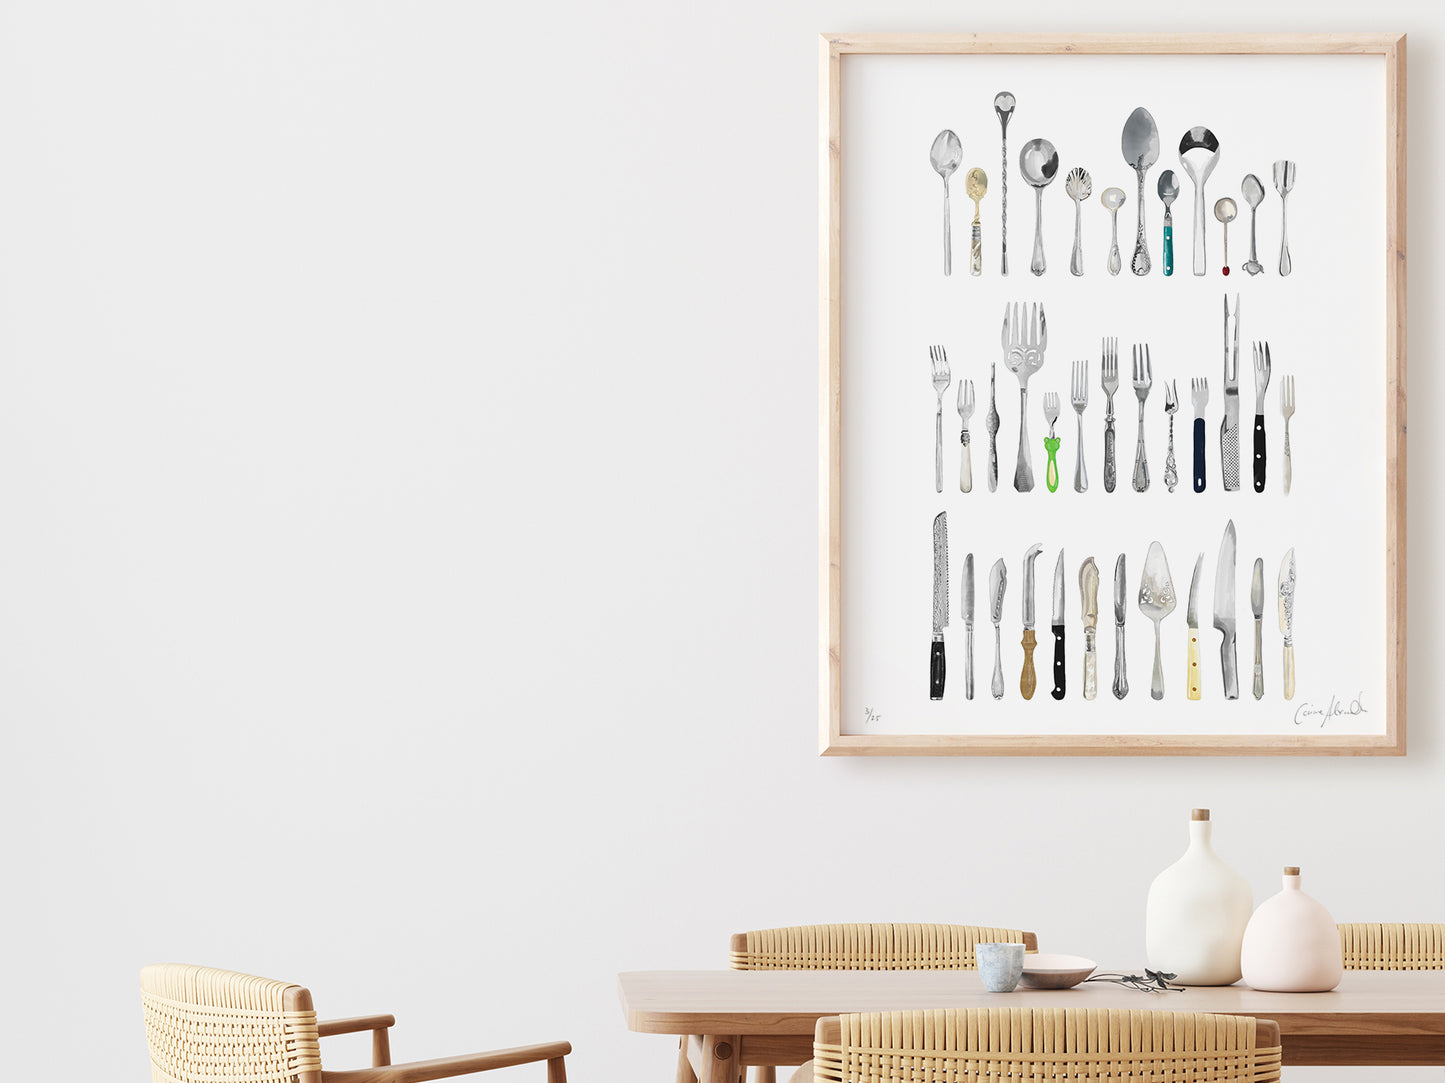 The Cutlery Draw